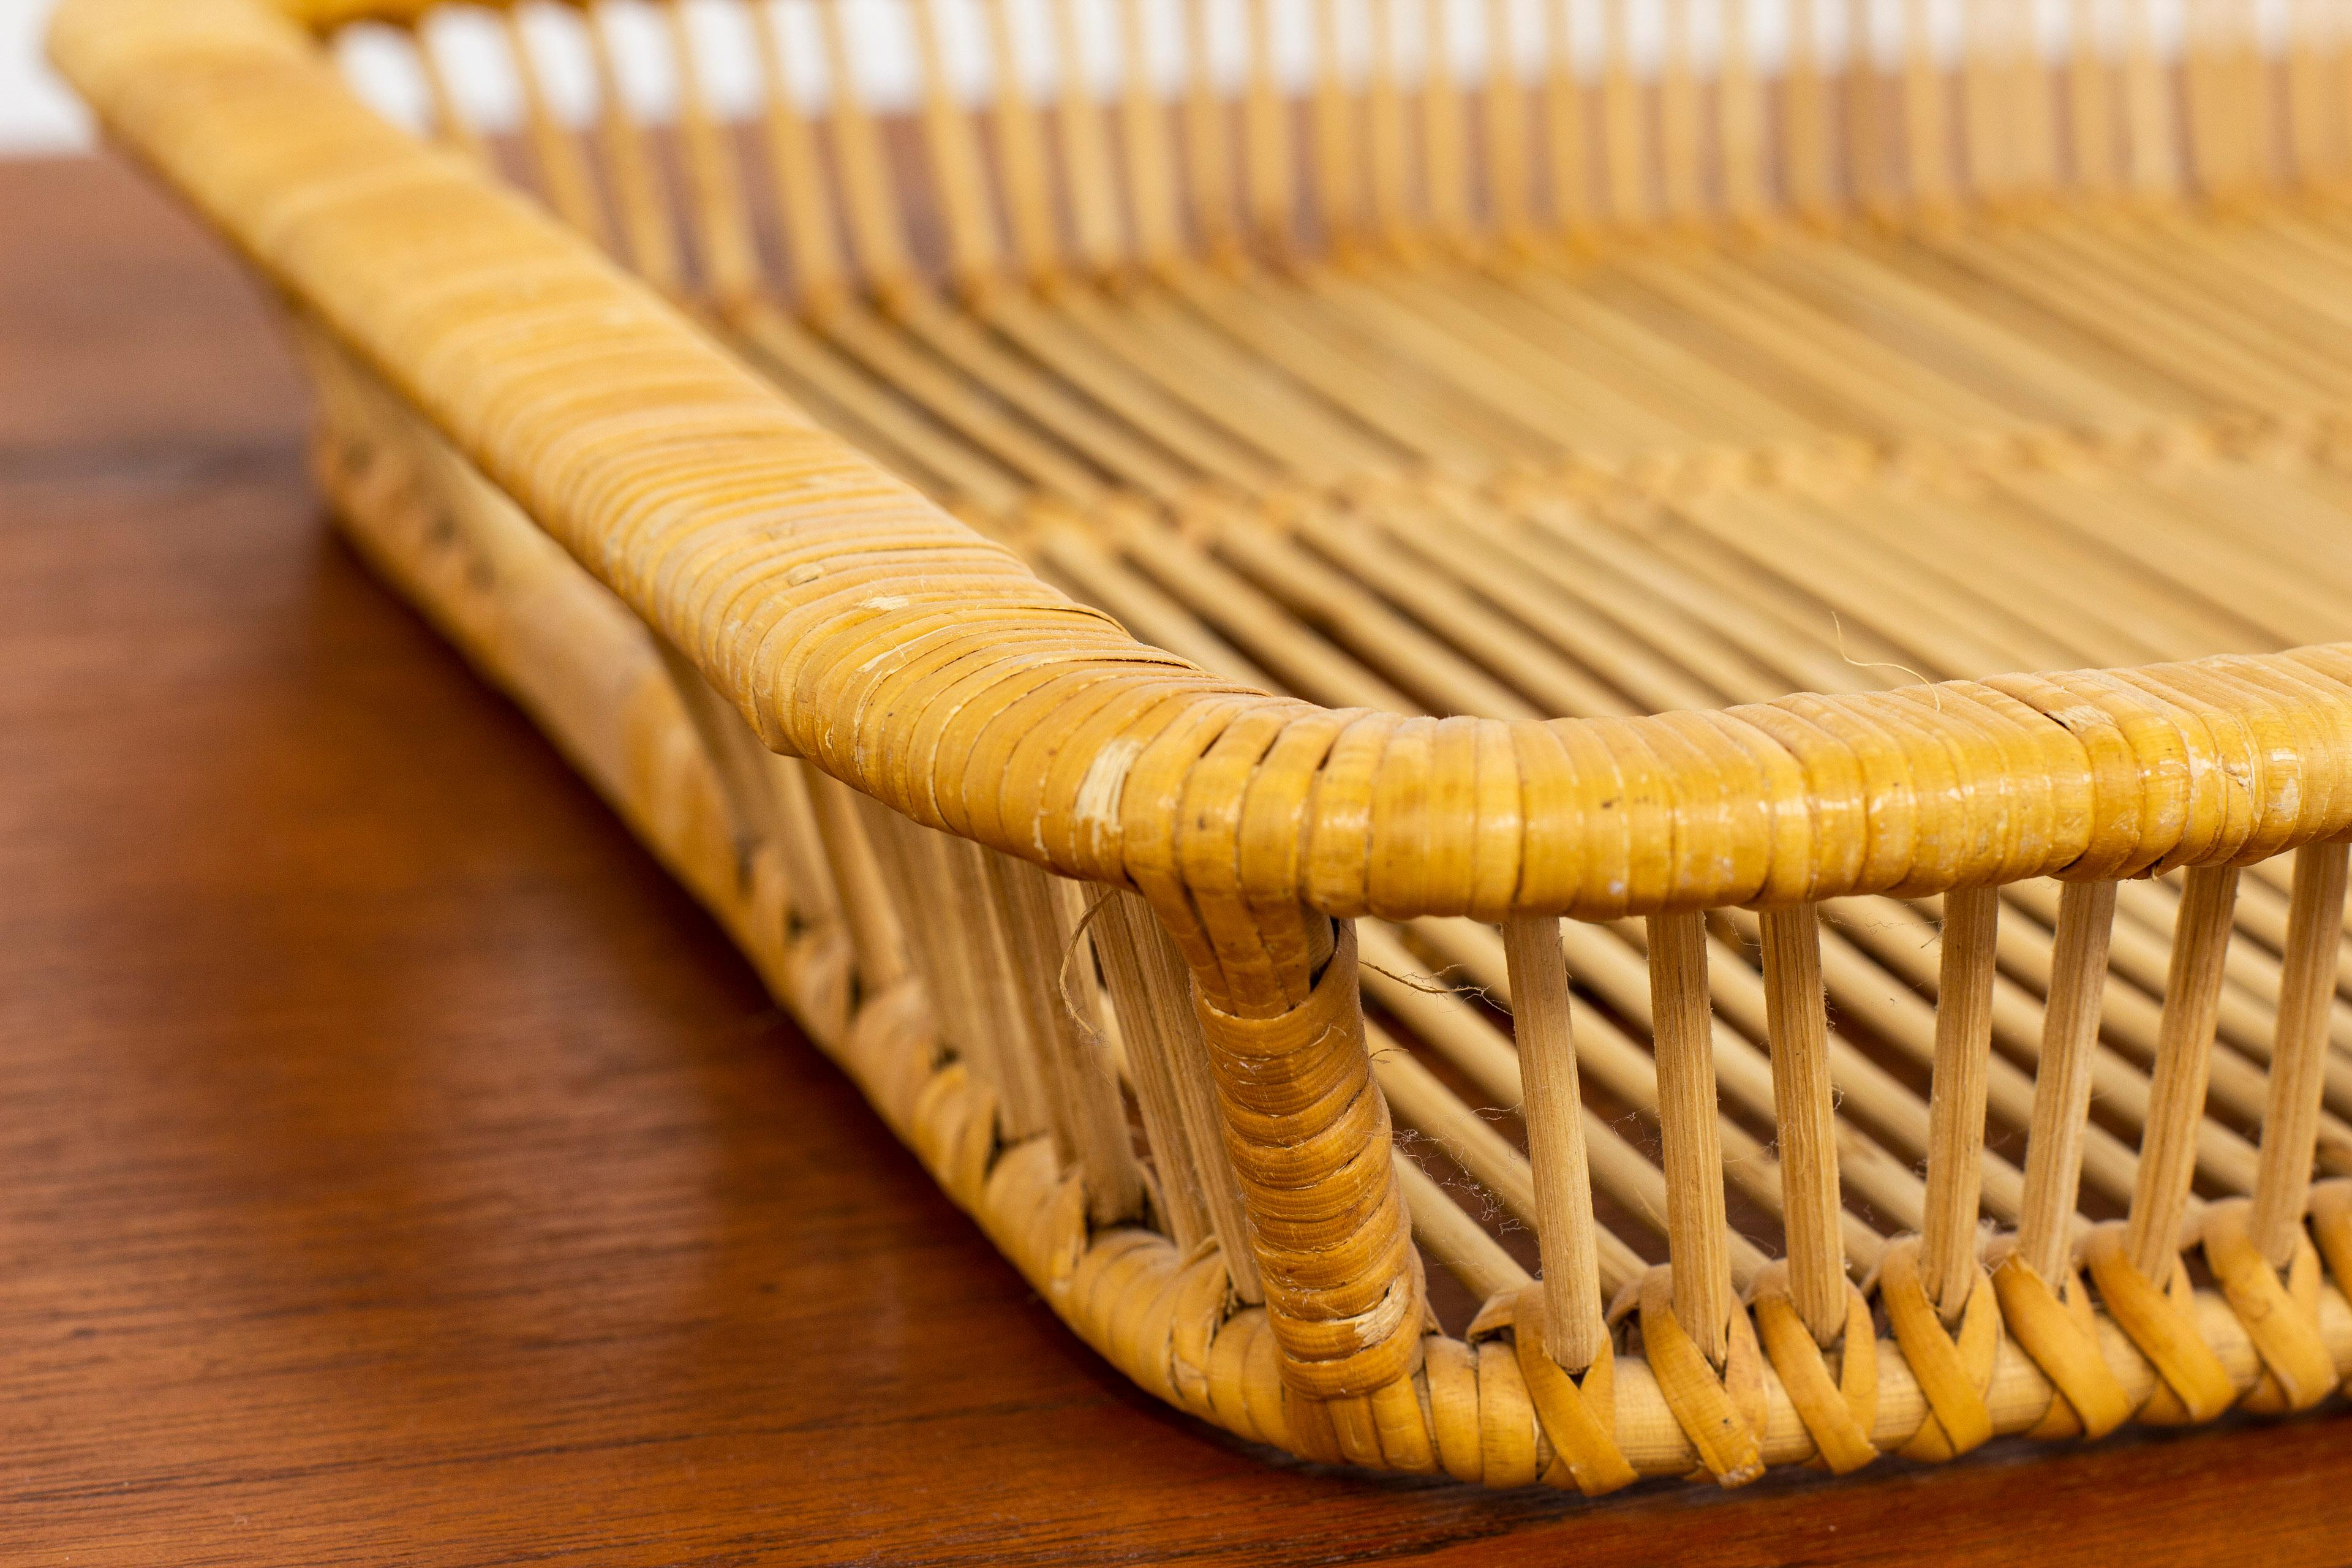 Mid-20th Century Rattan Tray Designed and Made by Artek in Finland During the 1960s For Sale